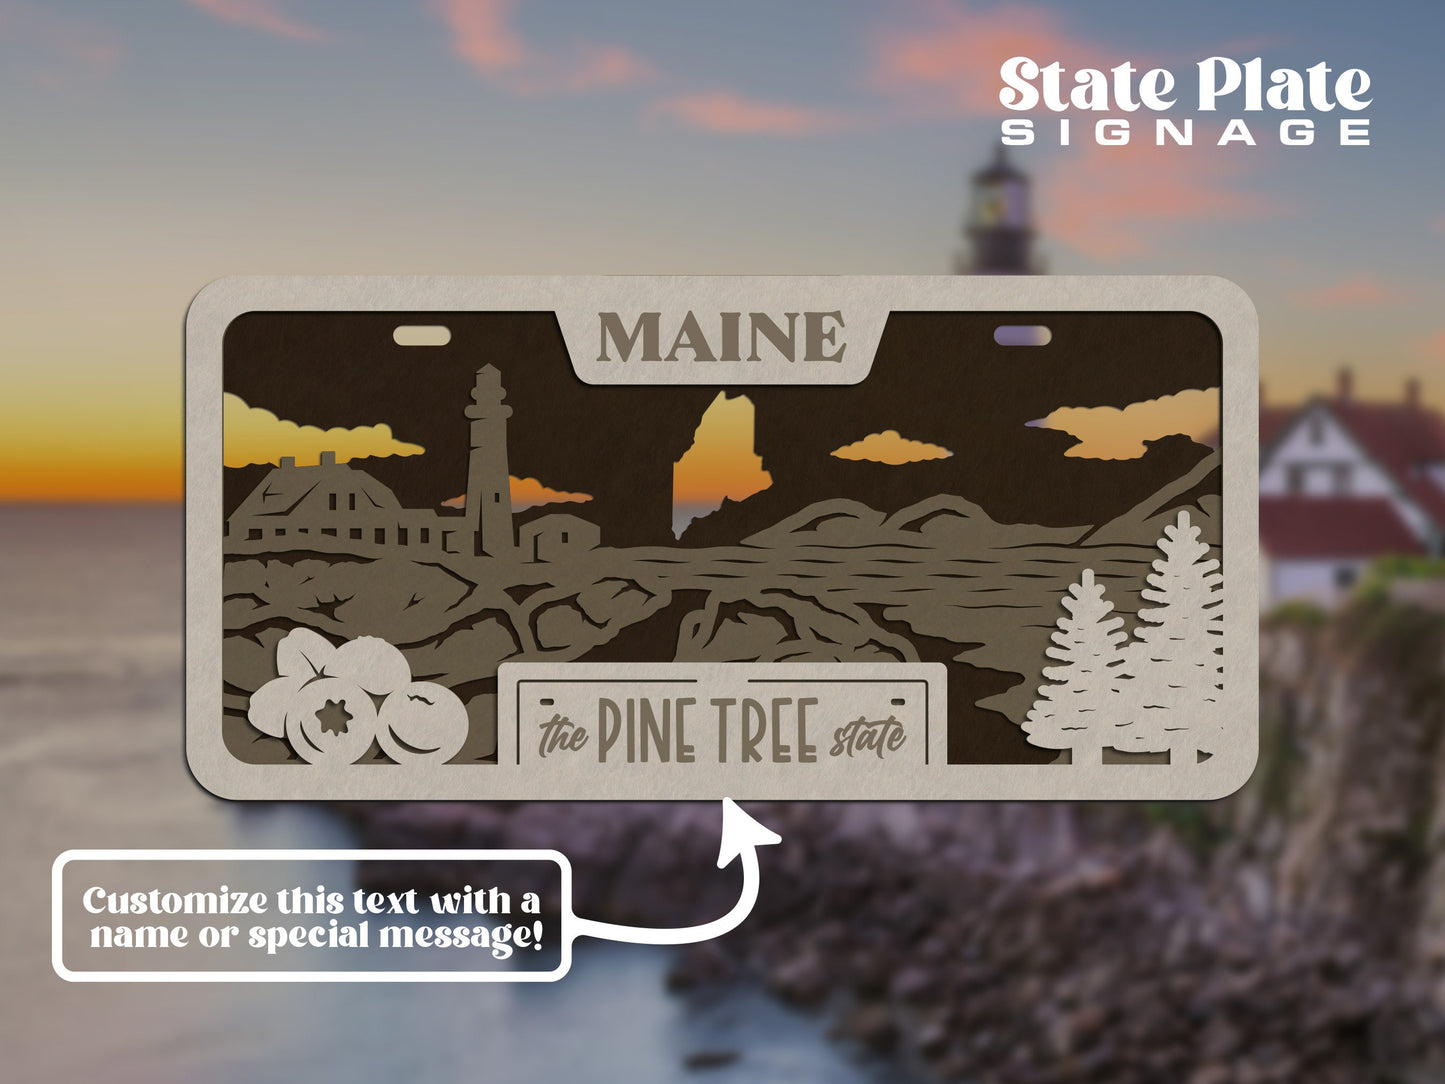 Maryland State Plate Ornament and Signage - SVG File Download - Sized for Glowforge - Laser Ready Digital Files